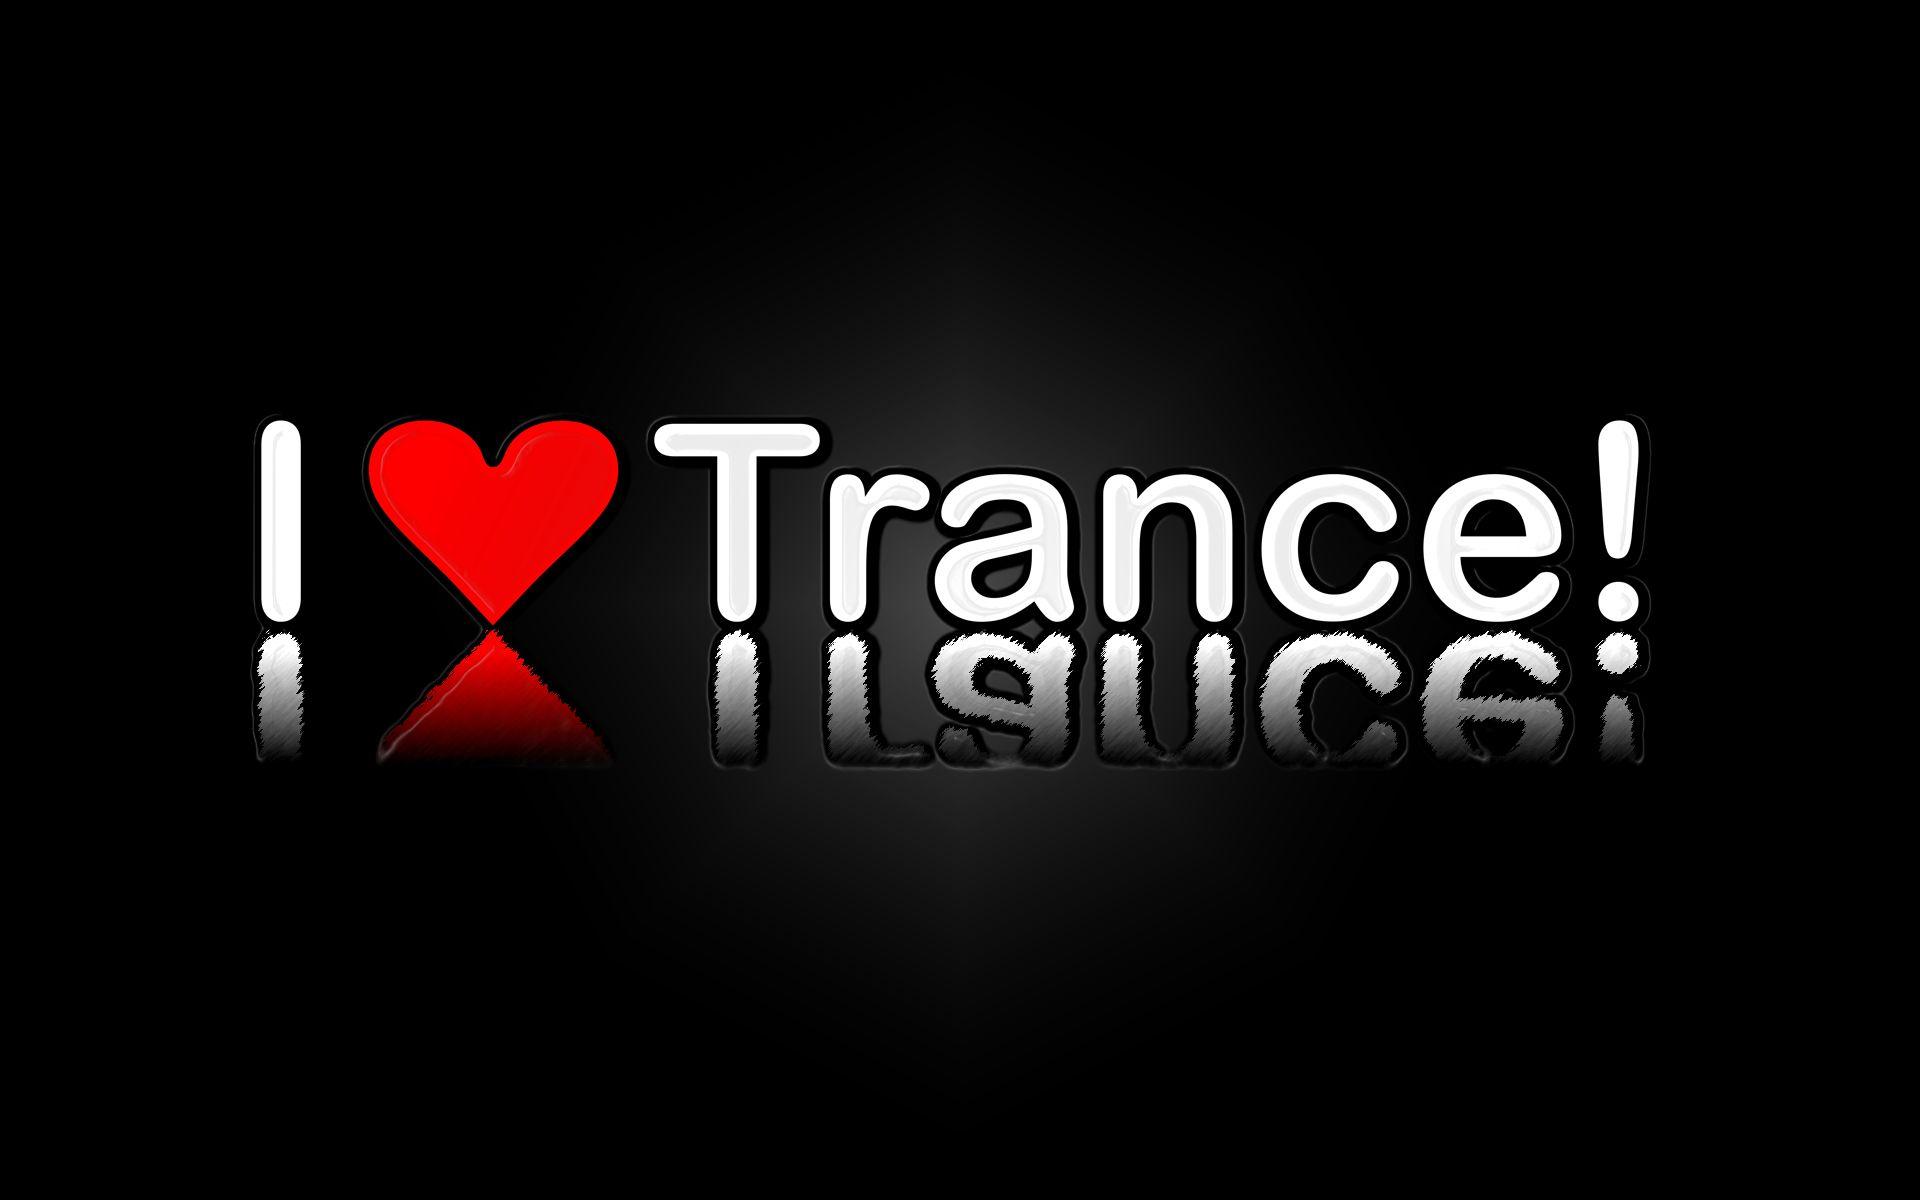 Download the I Love Trance Wallpaper, I Love Trance iPhone Wallpapers